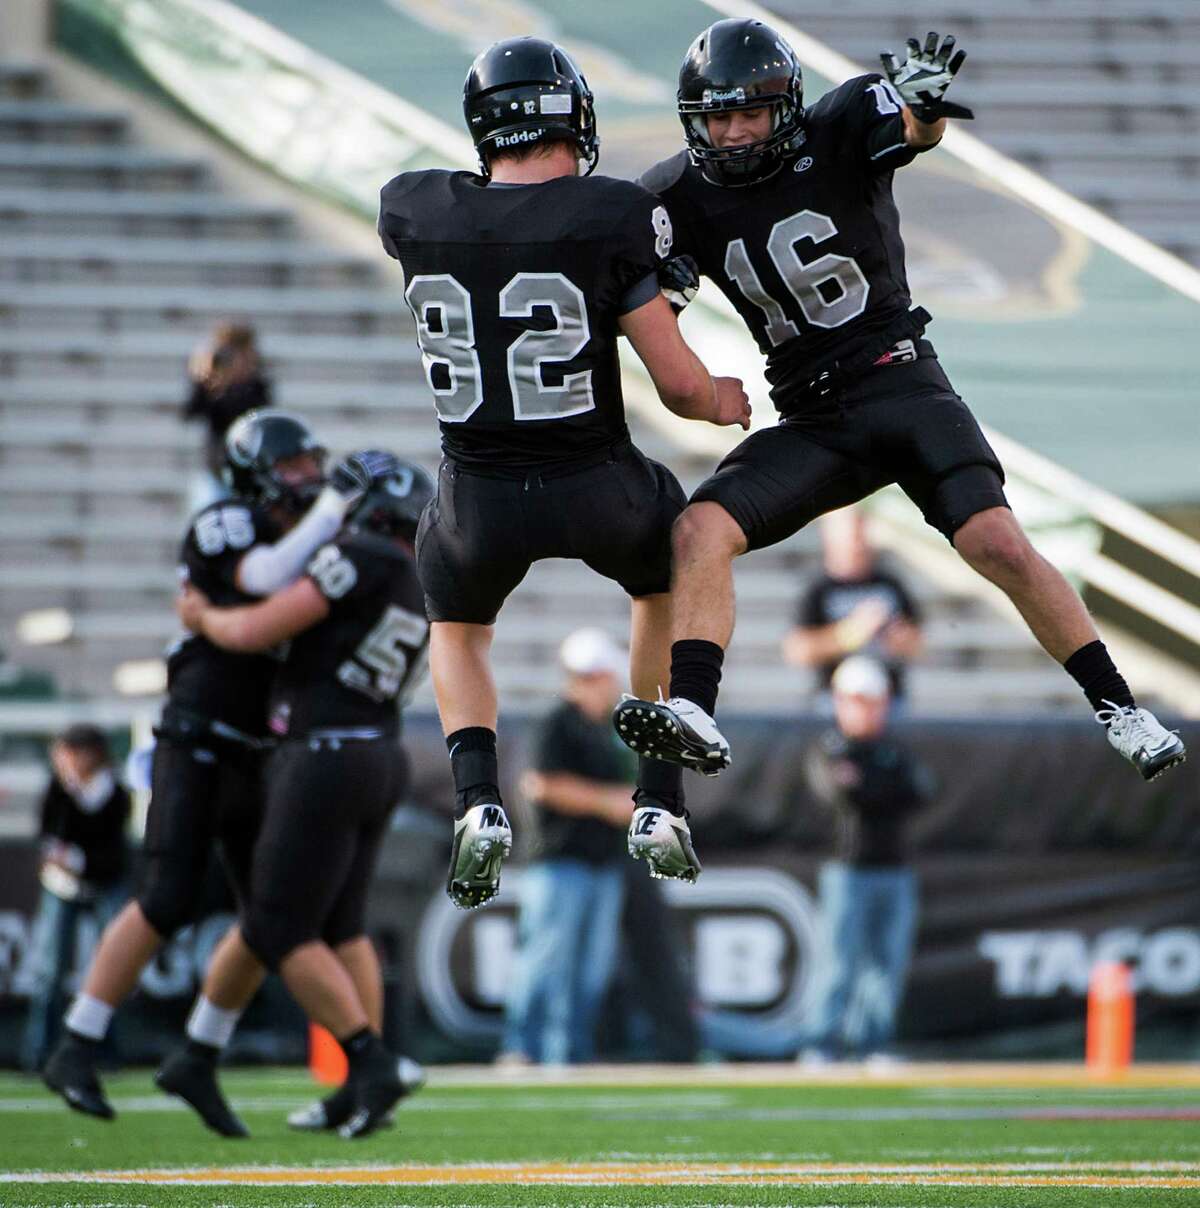 Cibolo Steele defensive back Tyler Petoskey (16) and tight end Matthew Moen (82) celebrate after the Knights recovered a Katy fumble during the second quarterin a Class 5A Division II state high school football semifinal game at Floyd Casey Stadium on Saturday, Dec. 15, 2012, in Waco. ( Smiley N. Pool / Houston Chronicle )